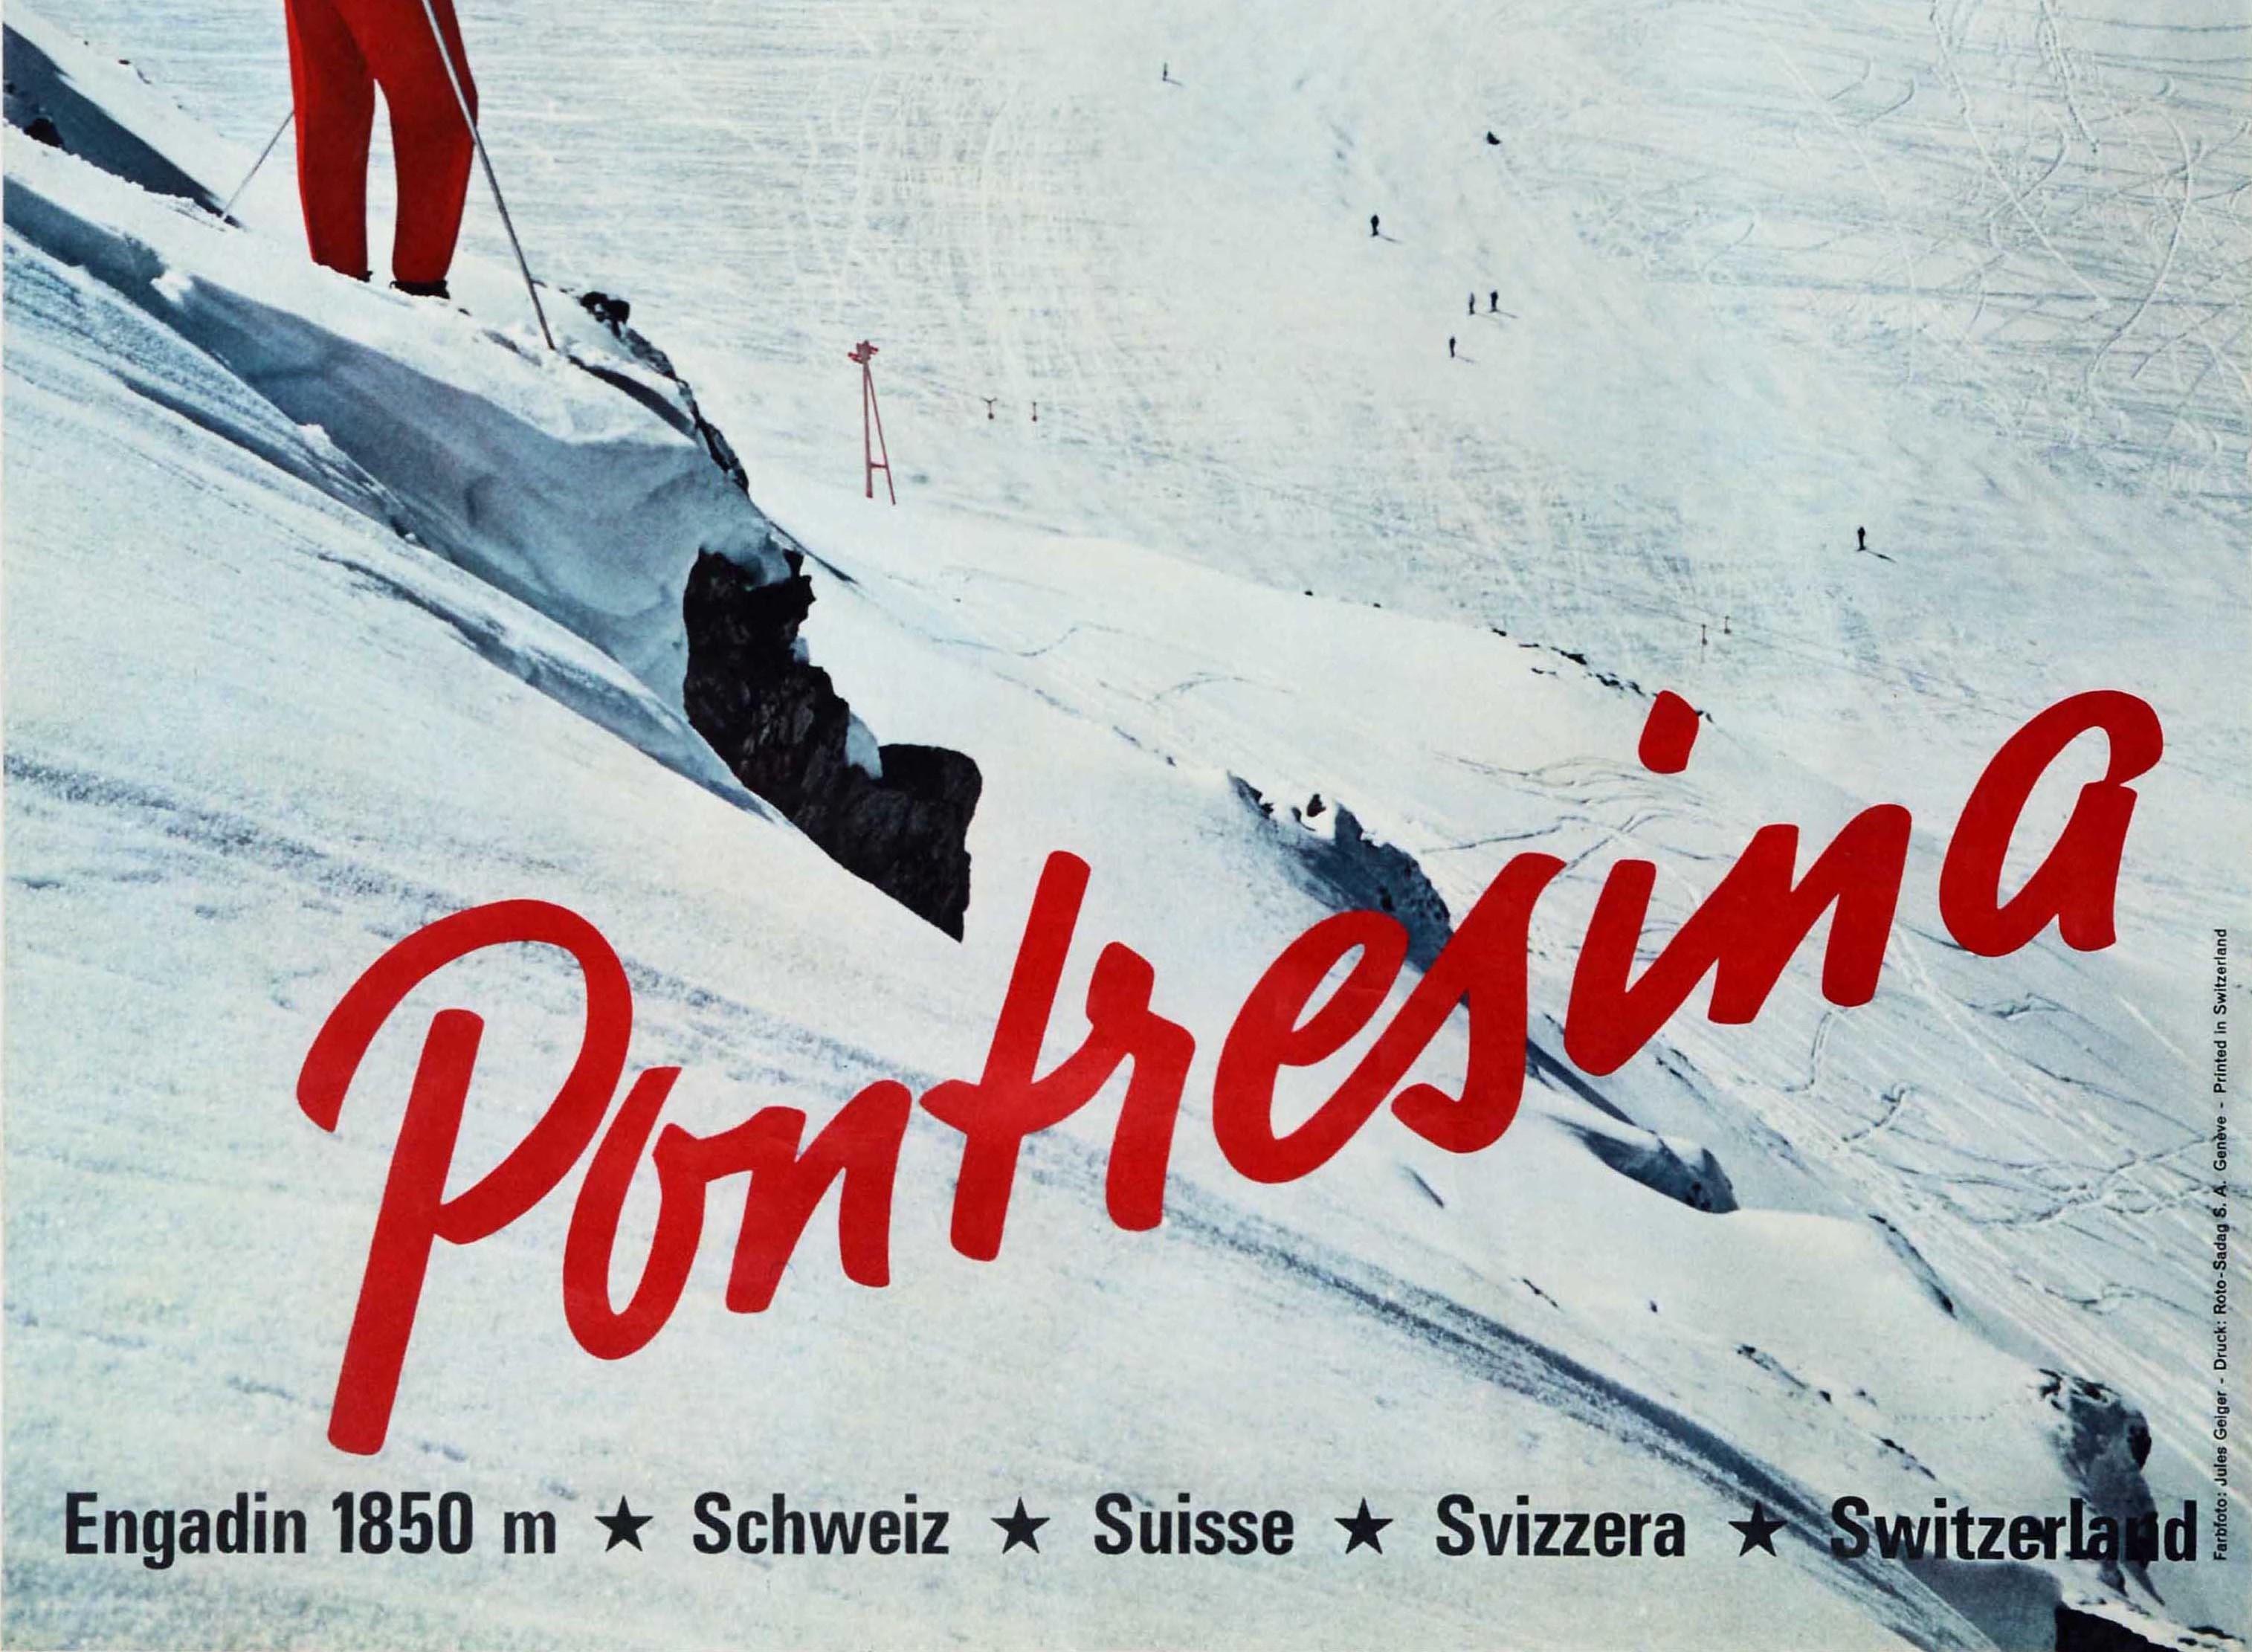 Original Vintage Skiing Poster Pontresina Switzerland Winter Sport Swiss Alps In Good Condition For Sale In London, GB